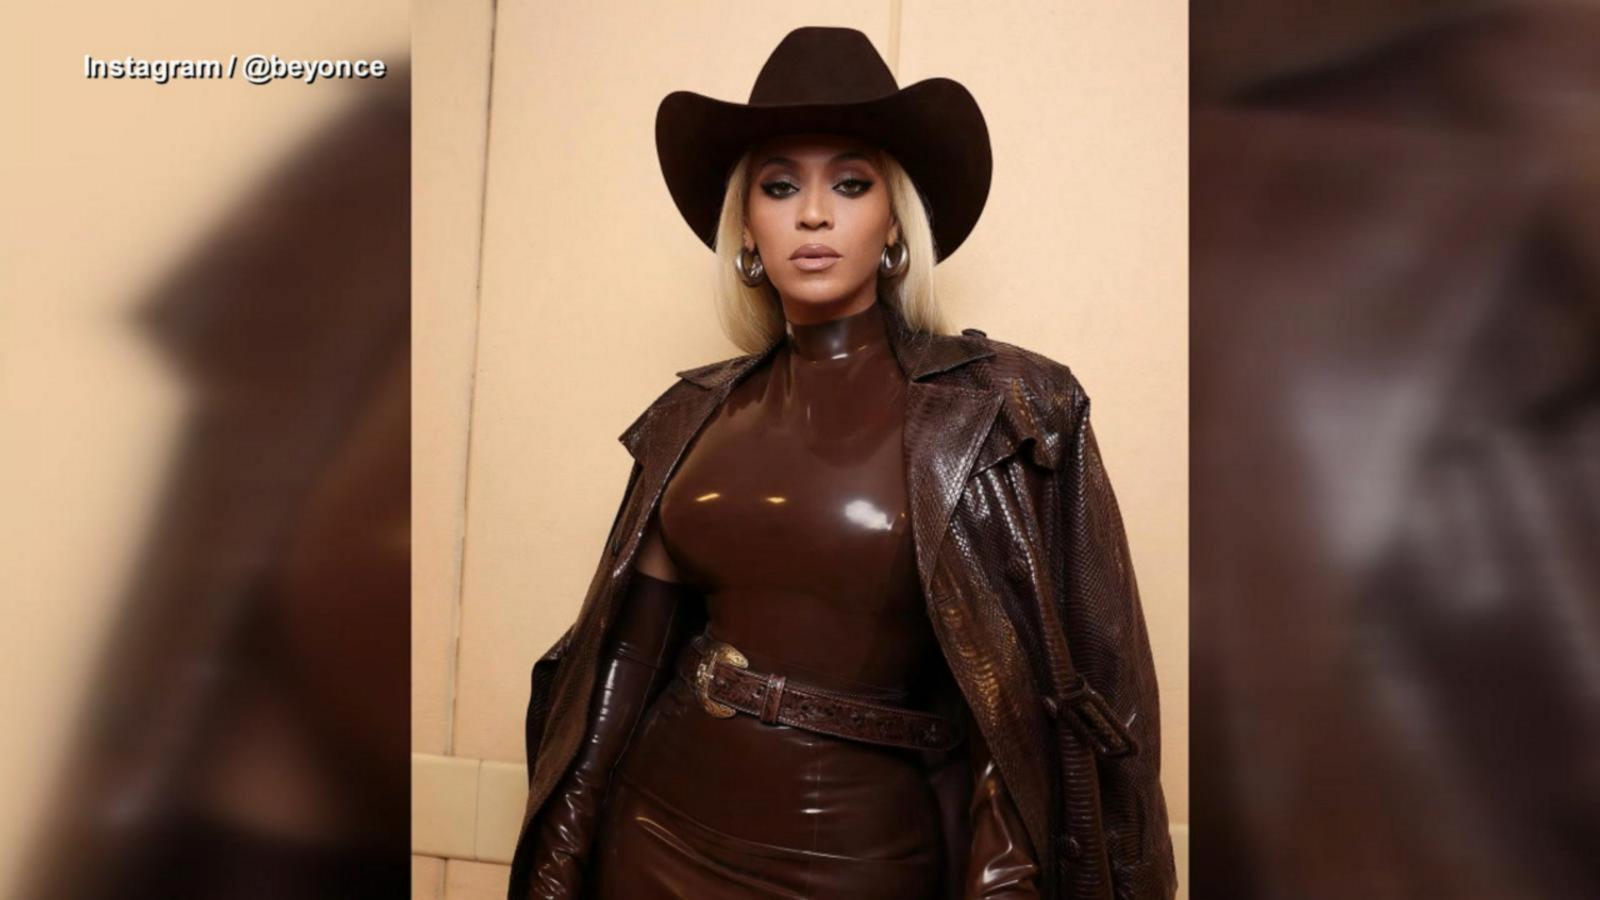 VIDEO: Stagecoach and the possible Beyoncé guest appearance